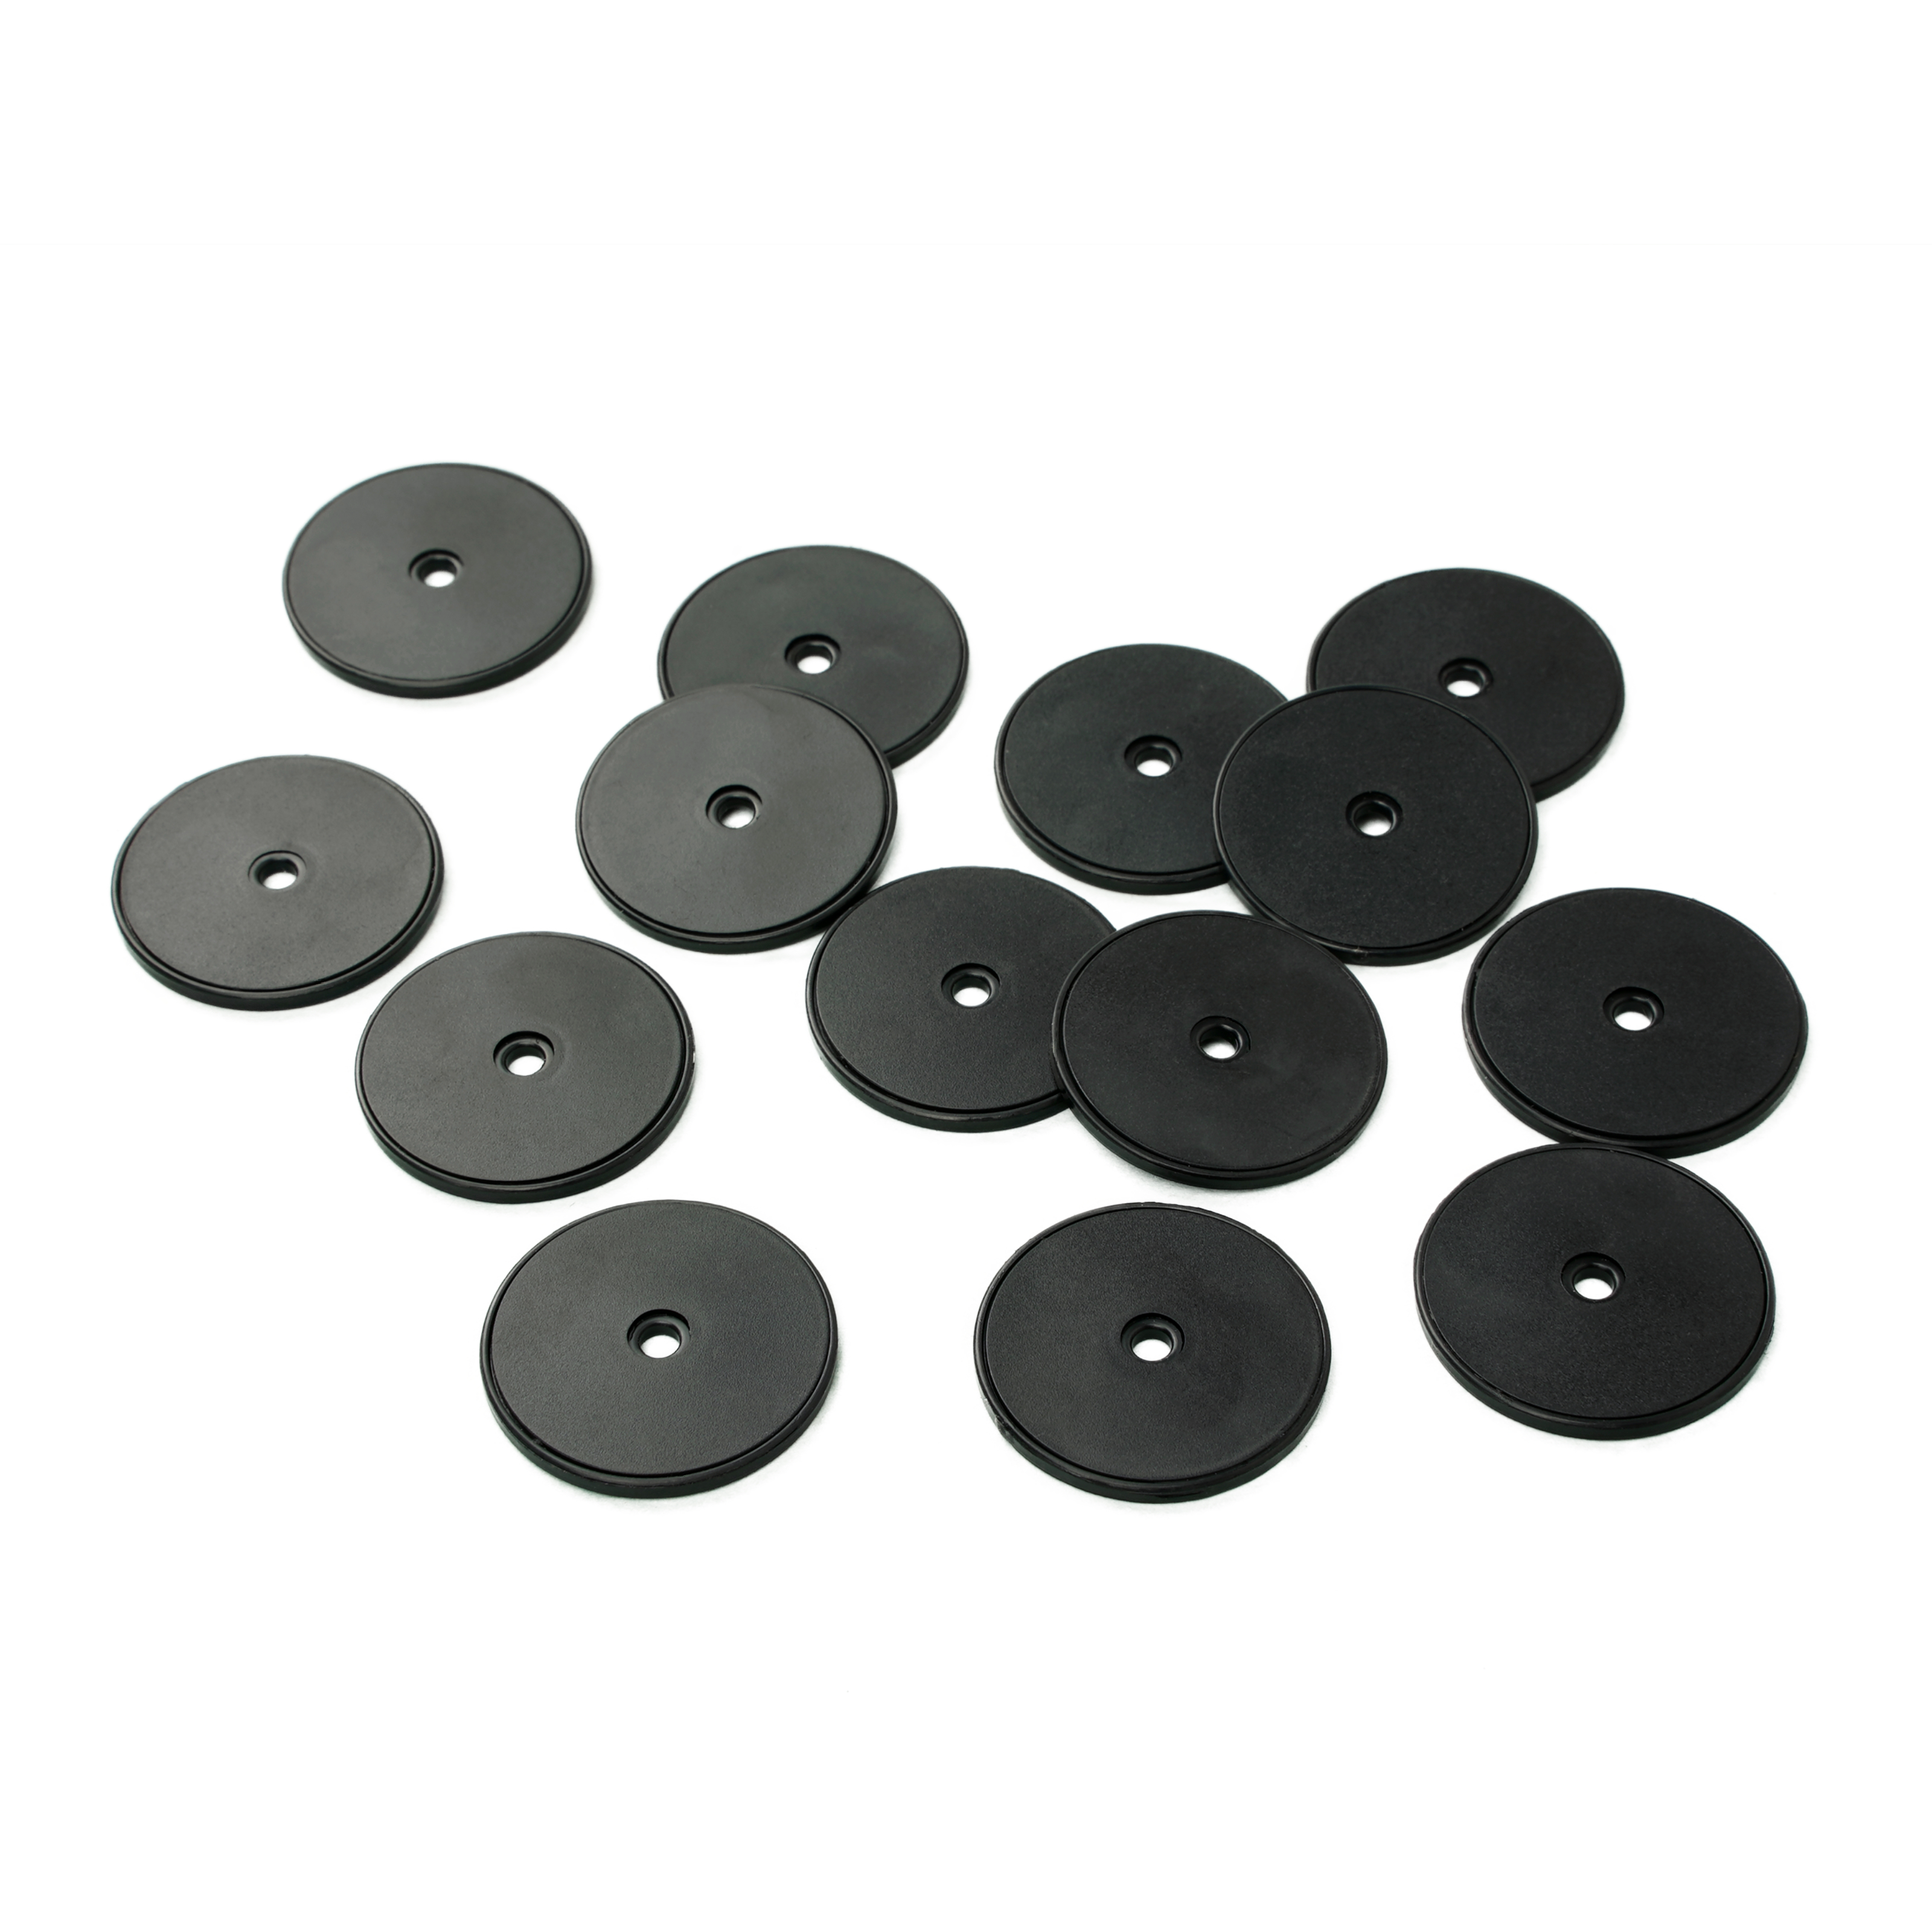 NFC coin ABS - 30 mm -NTAG213 - 180 byte - black - perforated